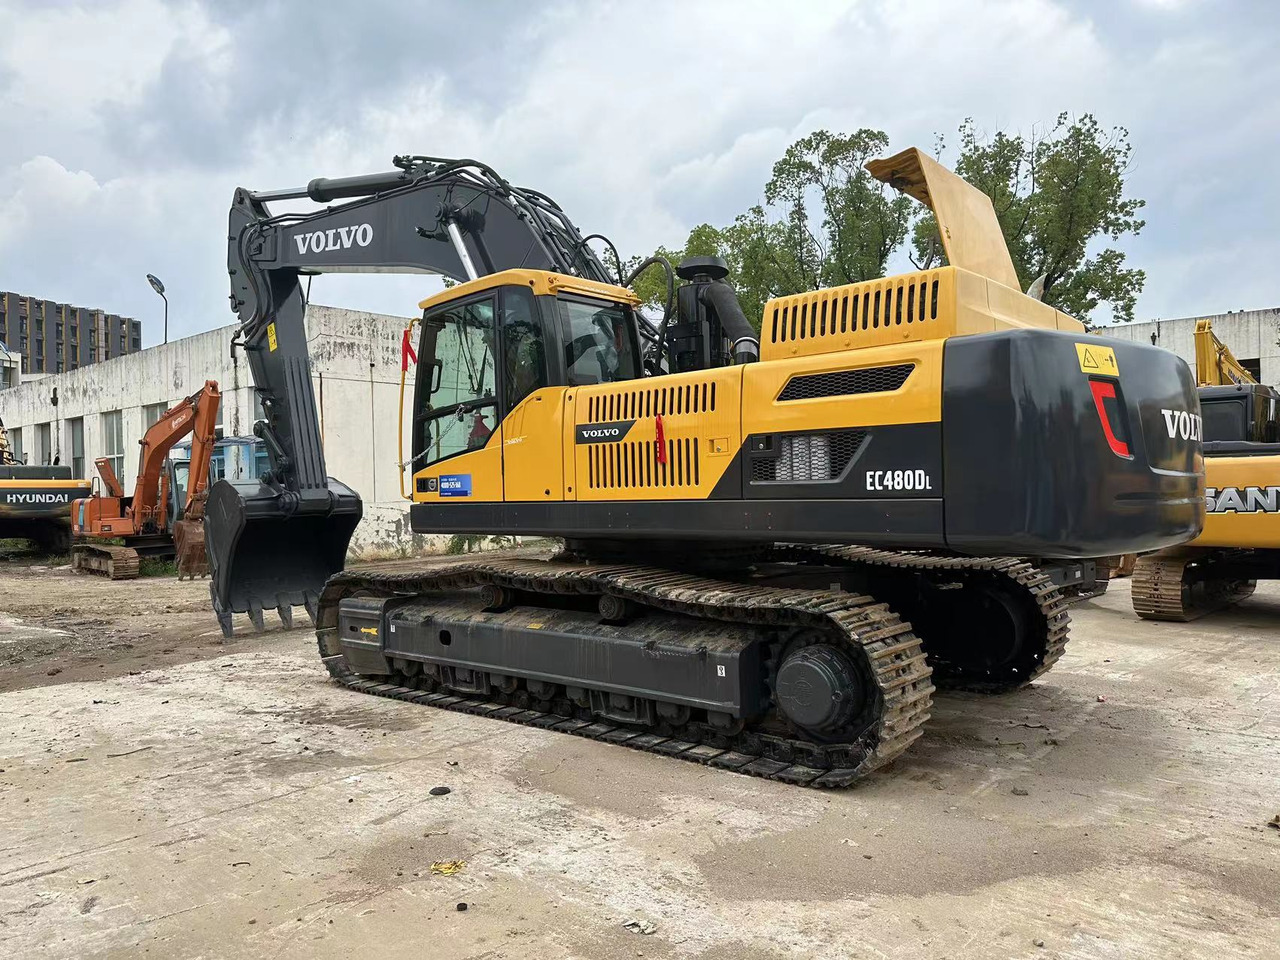 Hot selling original made Used excavator VOLVO EC480DL in stock low price for sale lizingą Hot selling original made Used excavator VOLVO EC480DL in stock low price for sale: foto 11